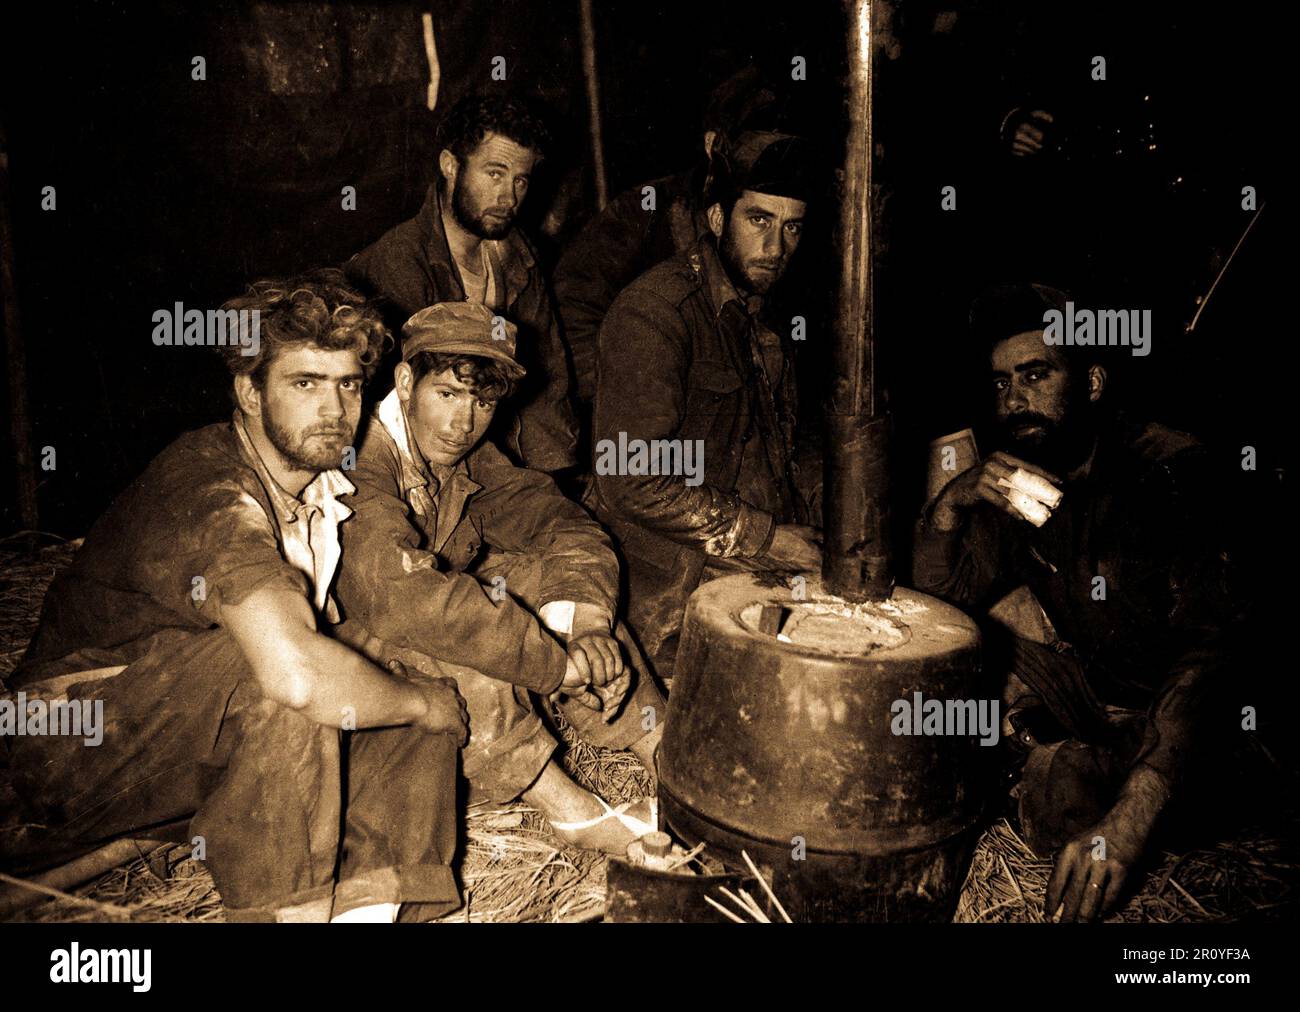 Former American and Australian prisoners of war warming up before a stove in the 24th Division medical clearing station after being returned to U.S. lines by Chinese Communists, February 10, 1951.  Photo by Sfc. Al Chang. (Army) Stock Photo